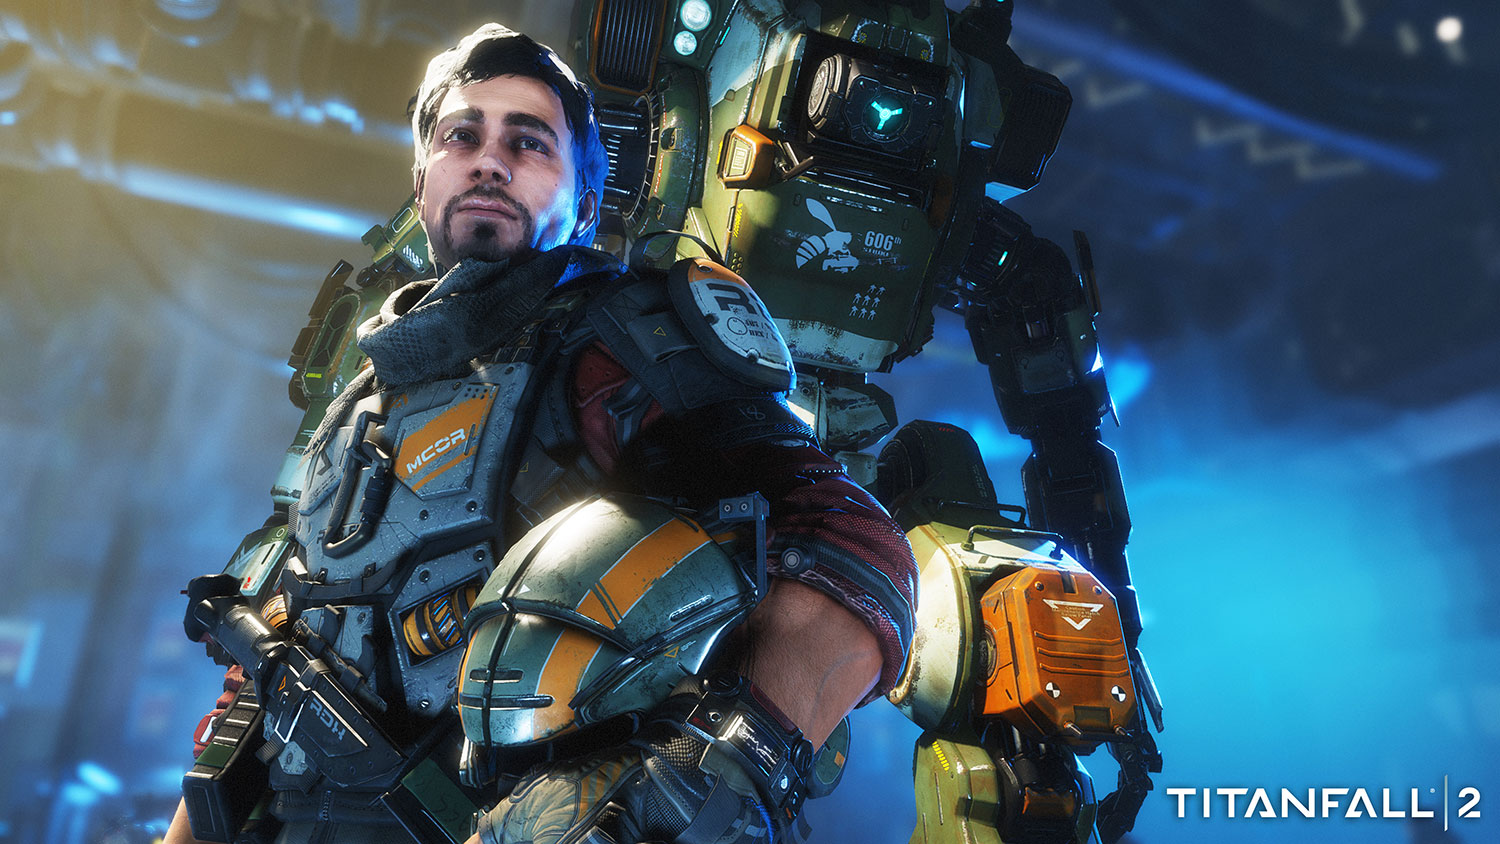 Titanfall 2 multiplayer 'tech tests' kick off later this month –  PlayStation.Blog